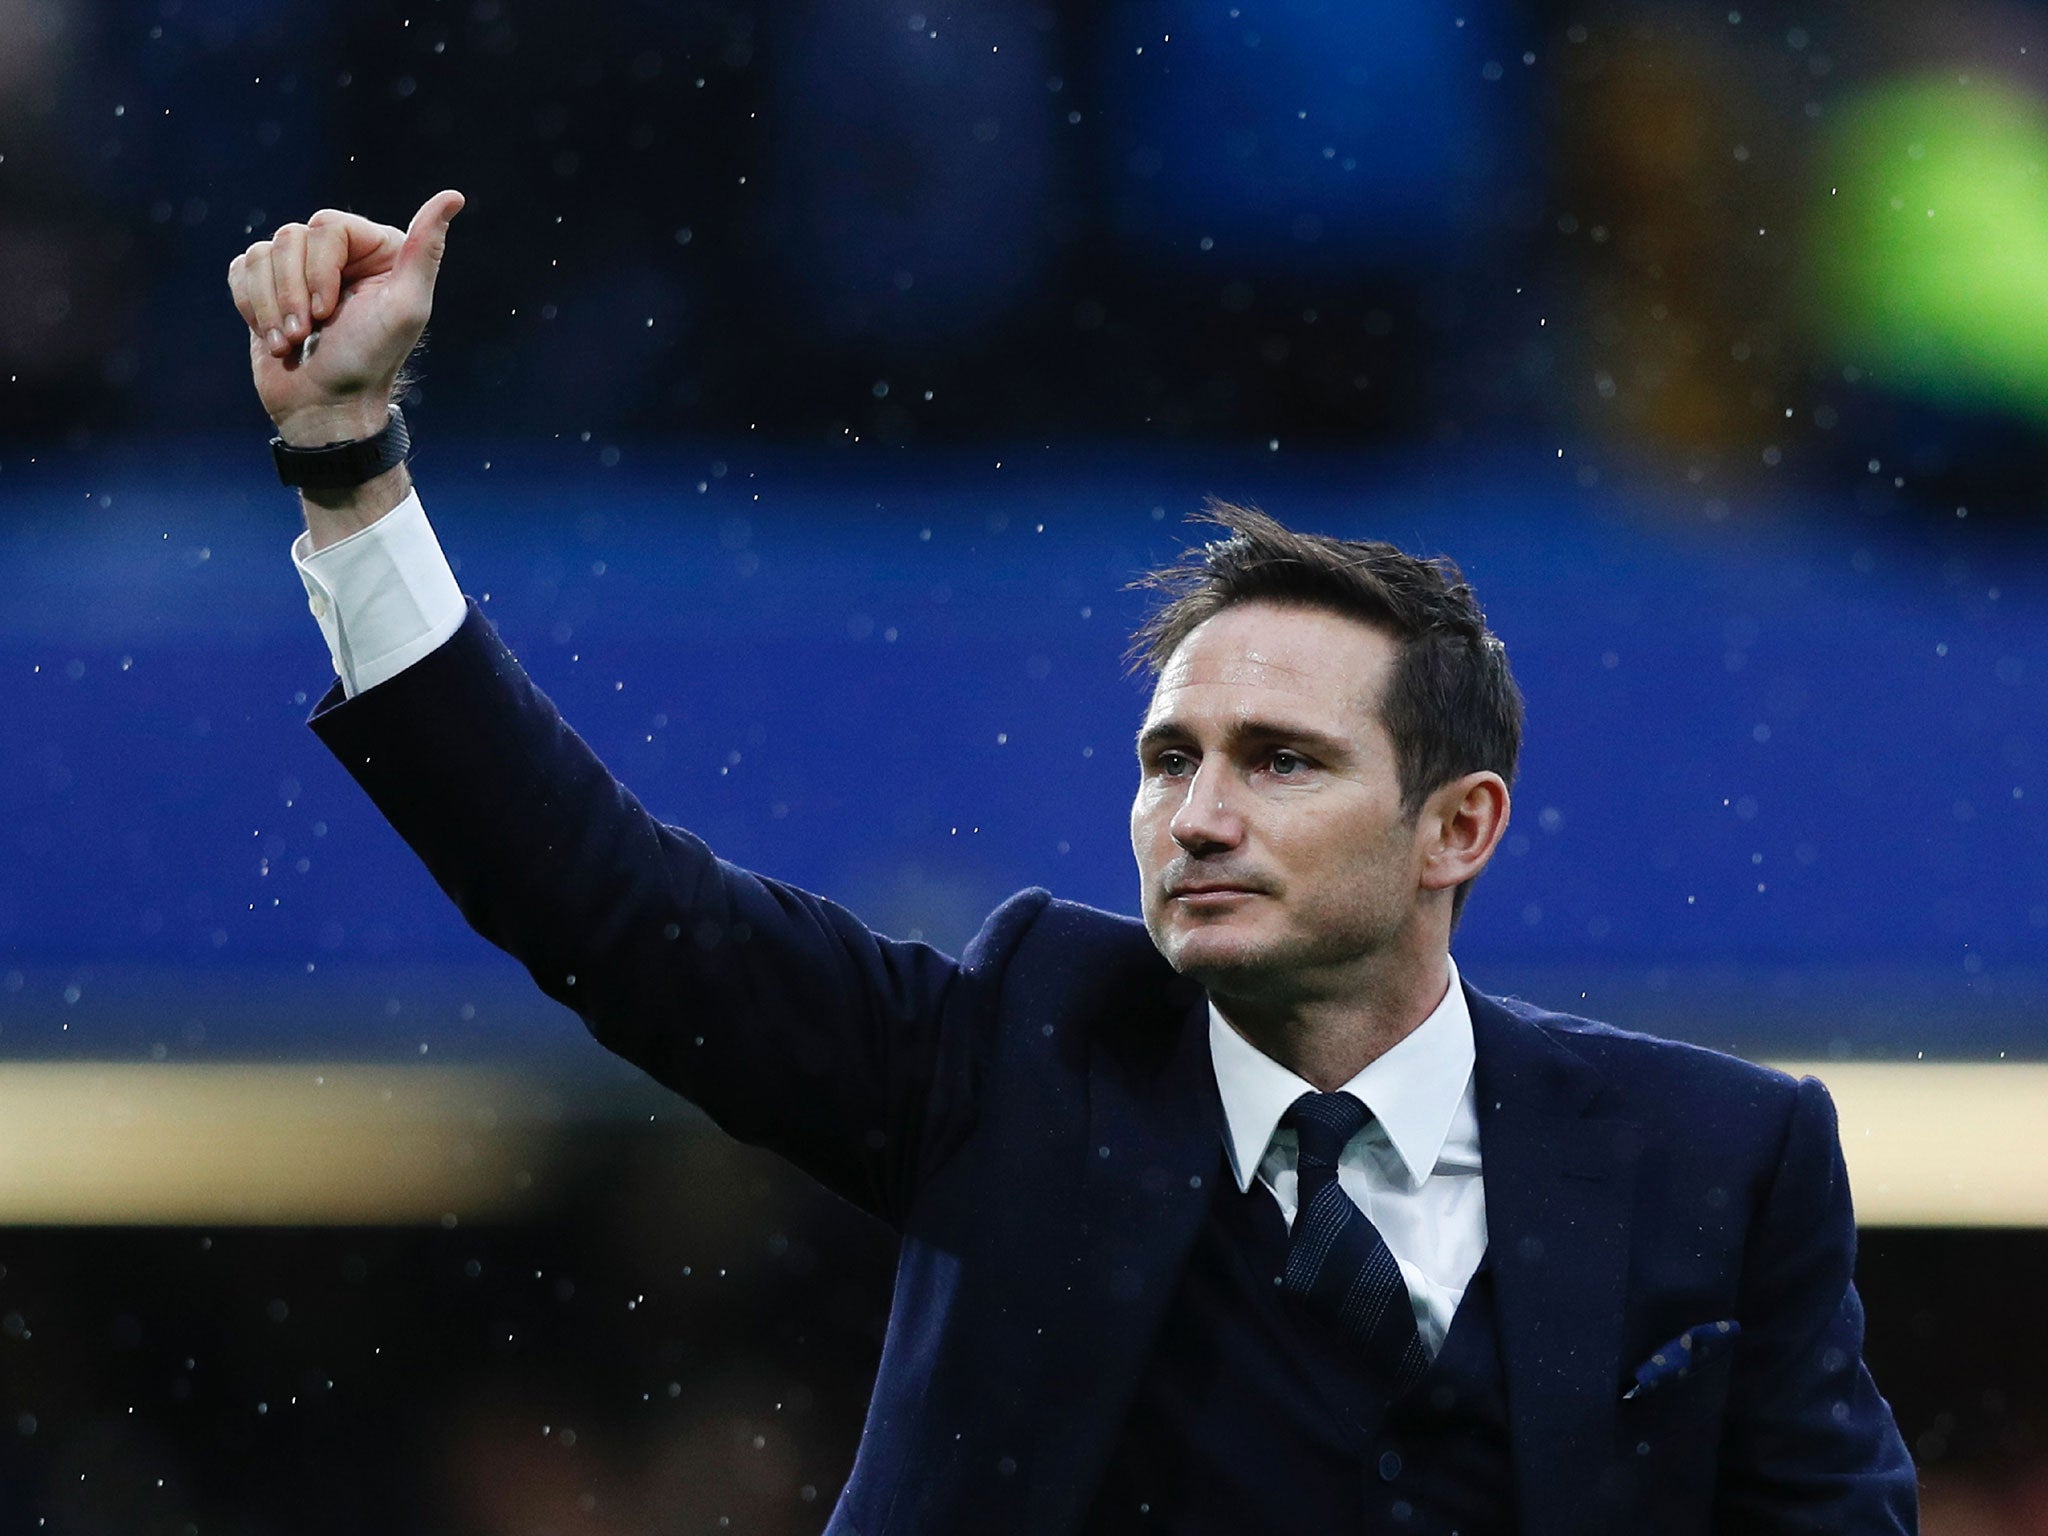 Lampard could be about to take his first steps into management